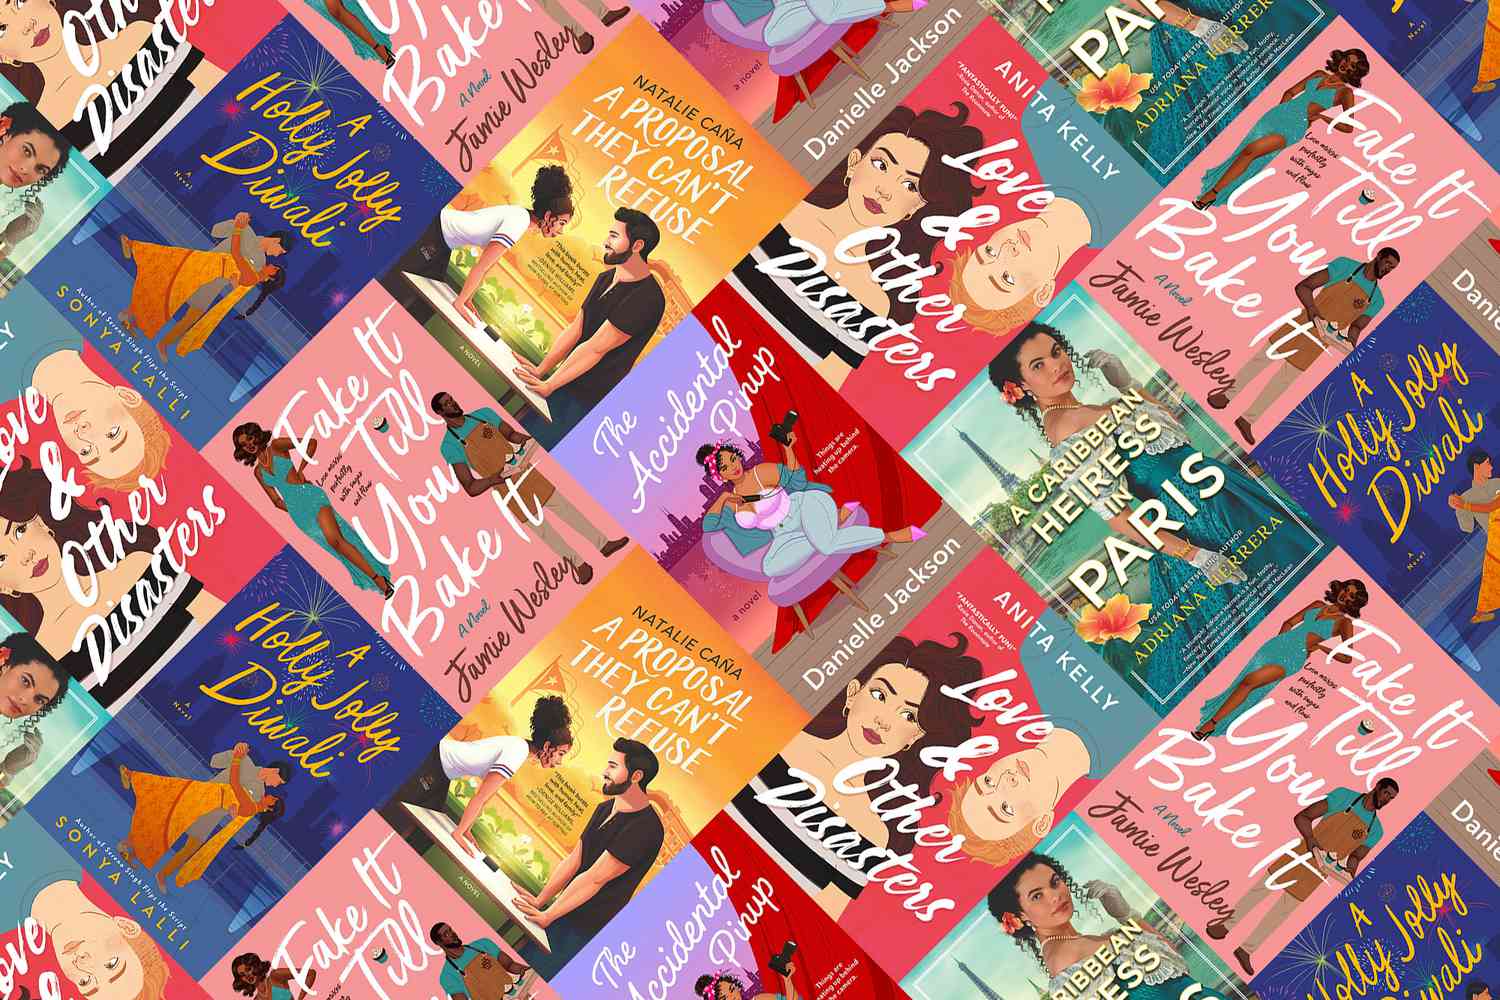 A Holly Jolly Diwali by Sonya Lalli A Caribbean Heiress in Paris by Adriana Herrera A Proposal They Can’t Refuse by Natalie Caña The Accidental Pinup by Danielle Jackson Fake It Til You Bake It by Jamie Wesley Love & Other Disasters by Anita Kelly